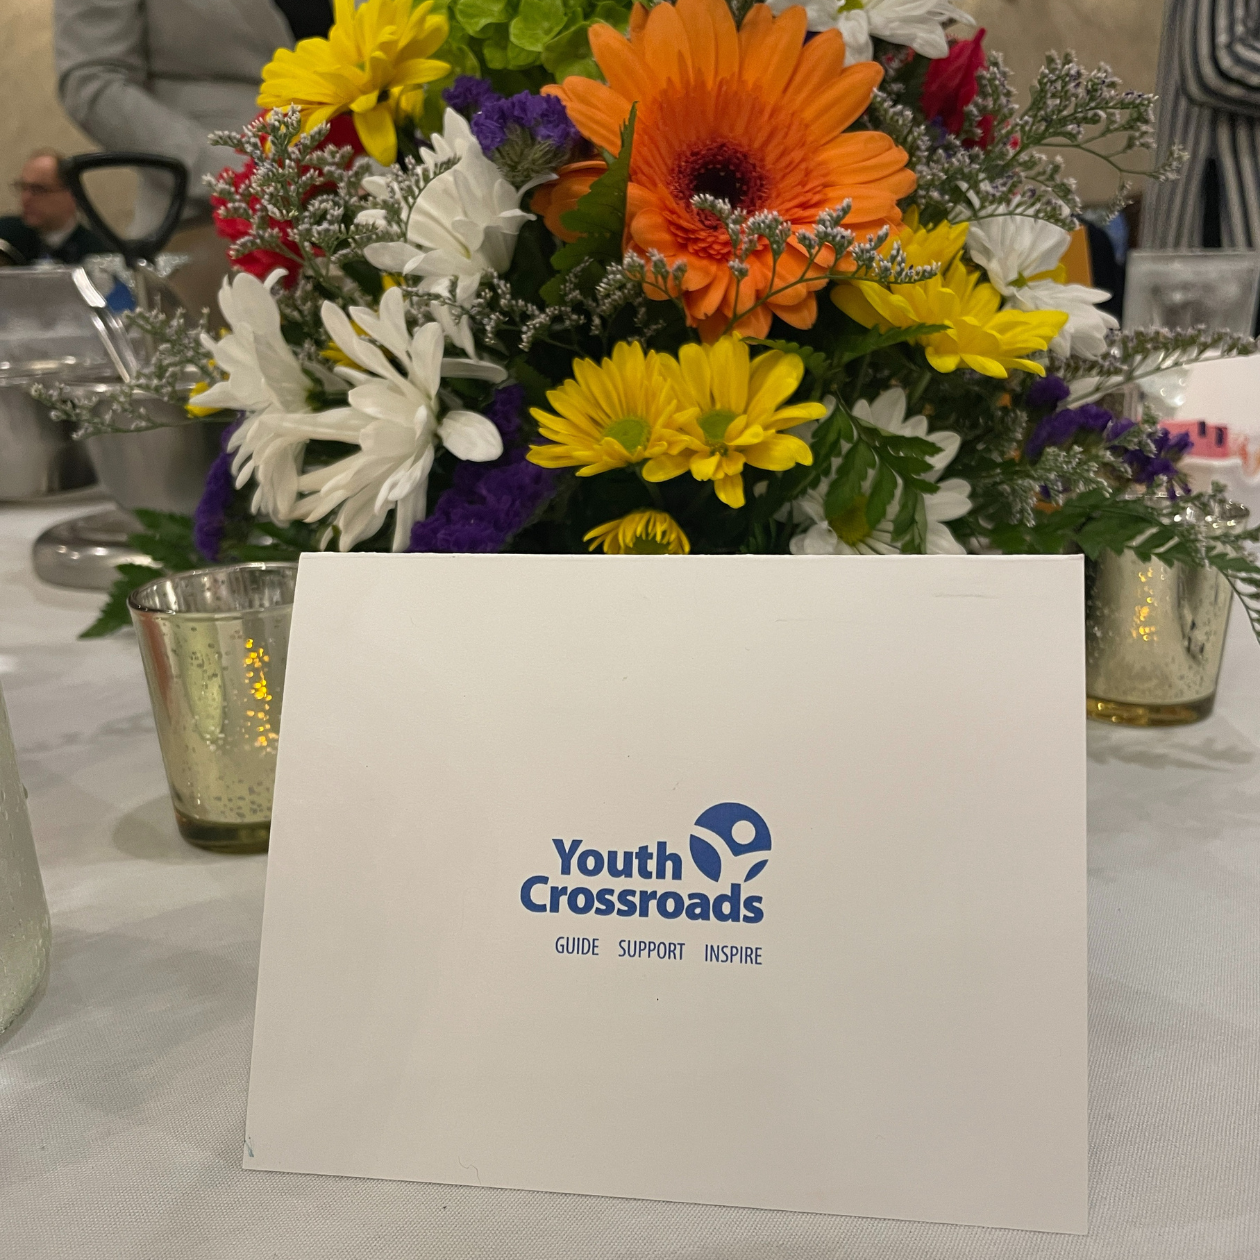 HCF Honored with Youth Crossroads’ Support Award